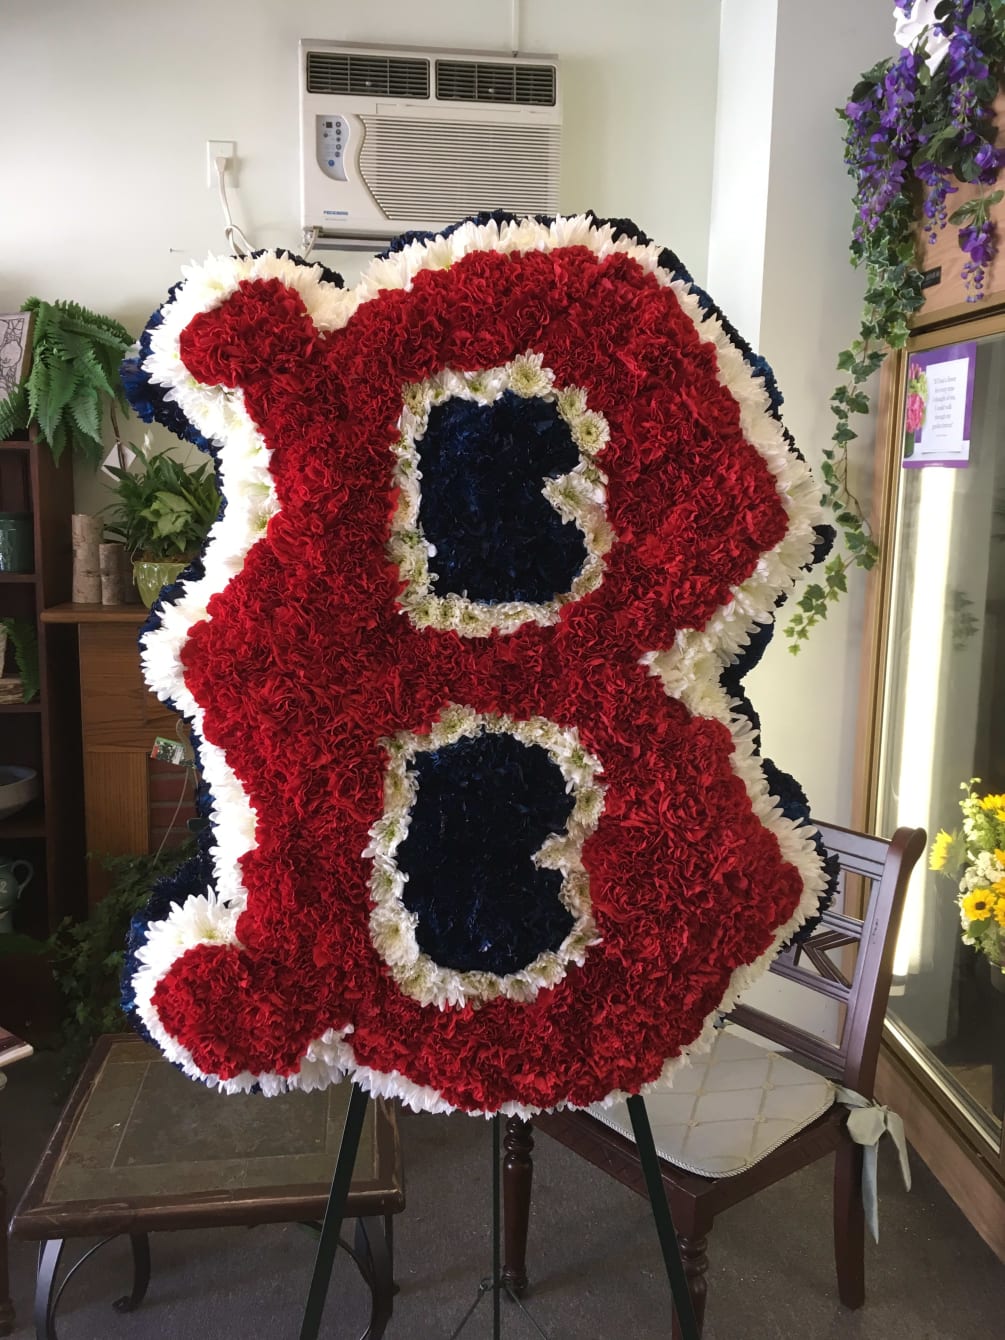 Candy bouquet - Boston Red Sox  Flowers for men, Red sox nation, Crafts